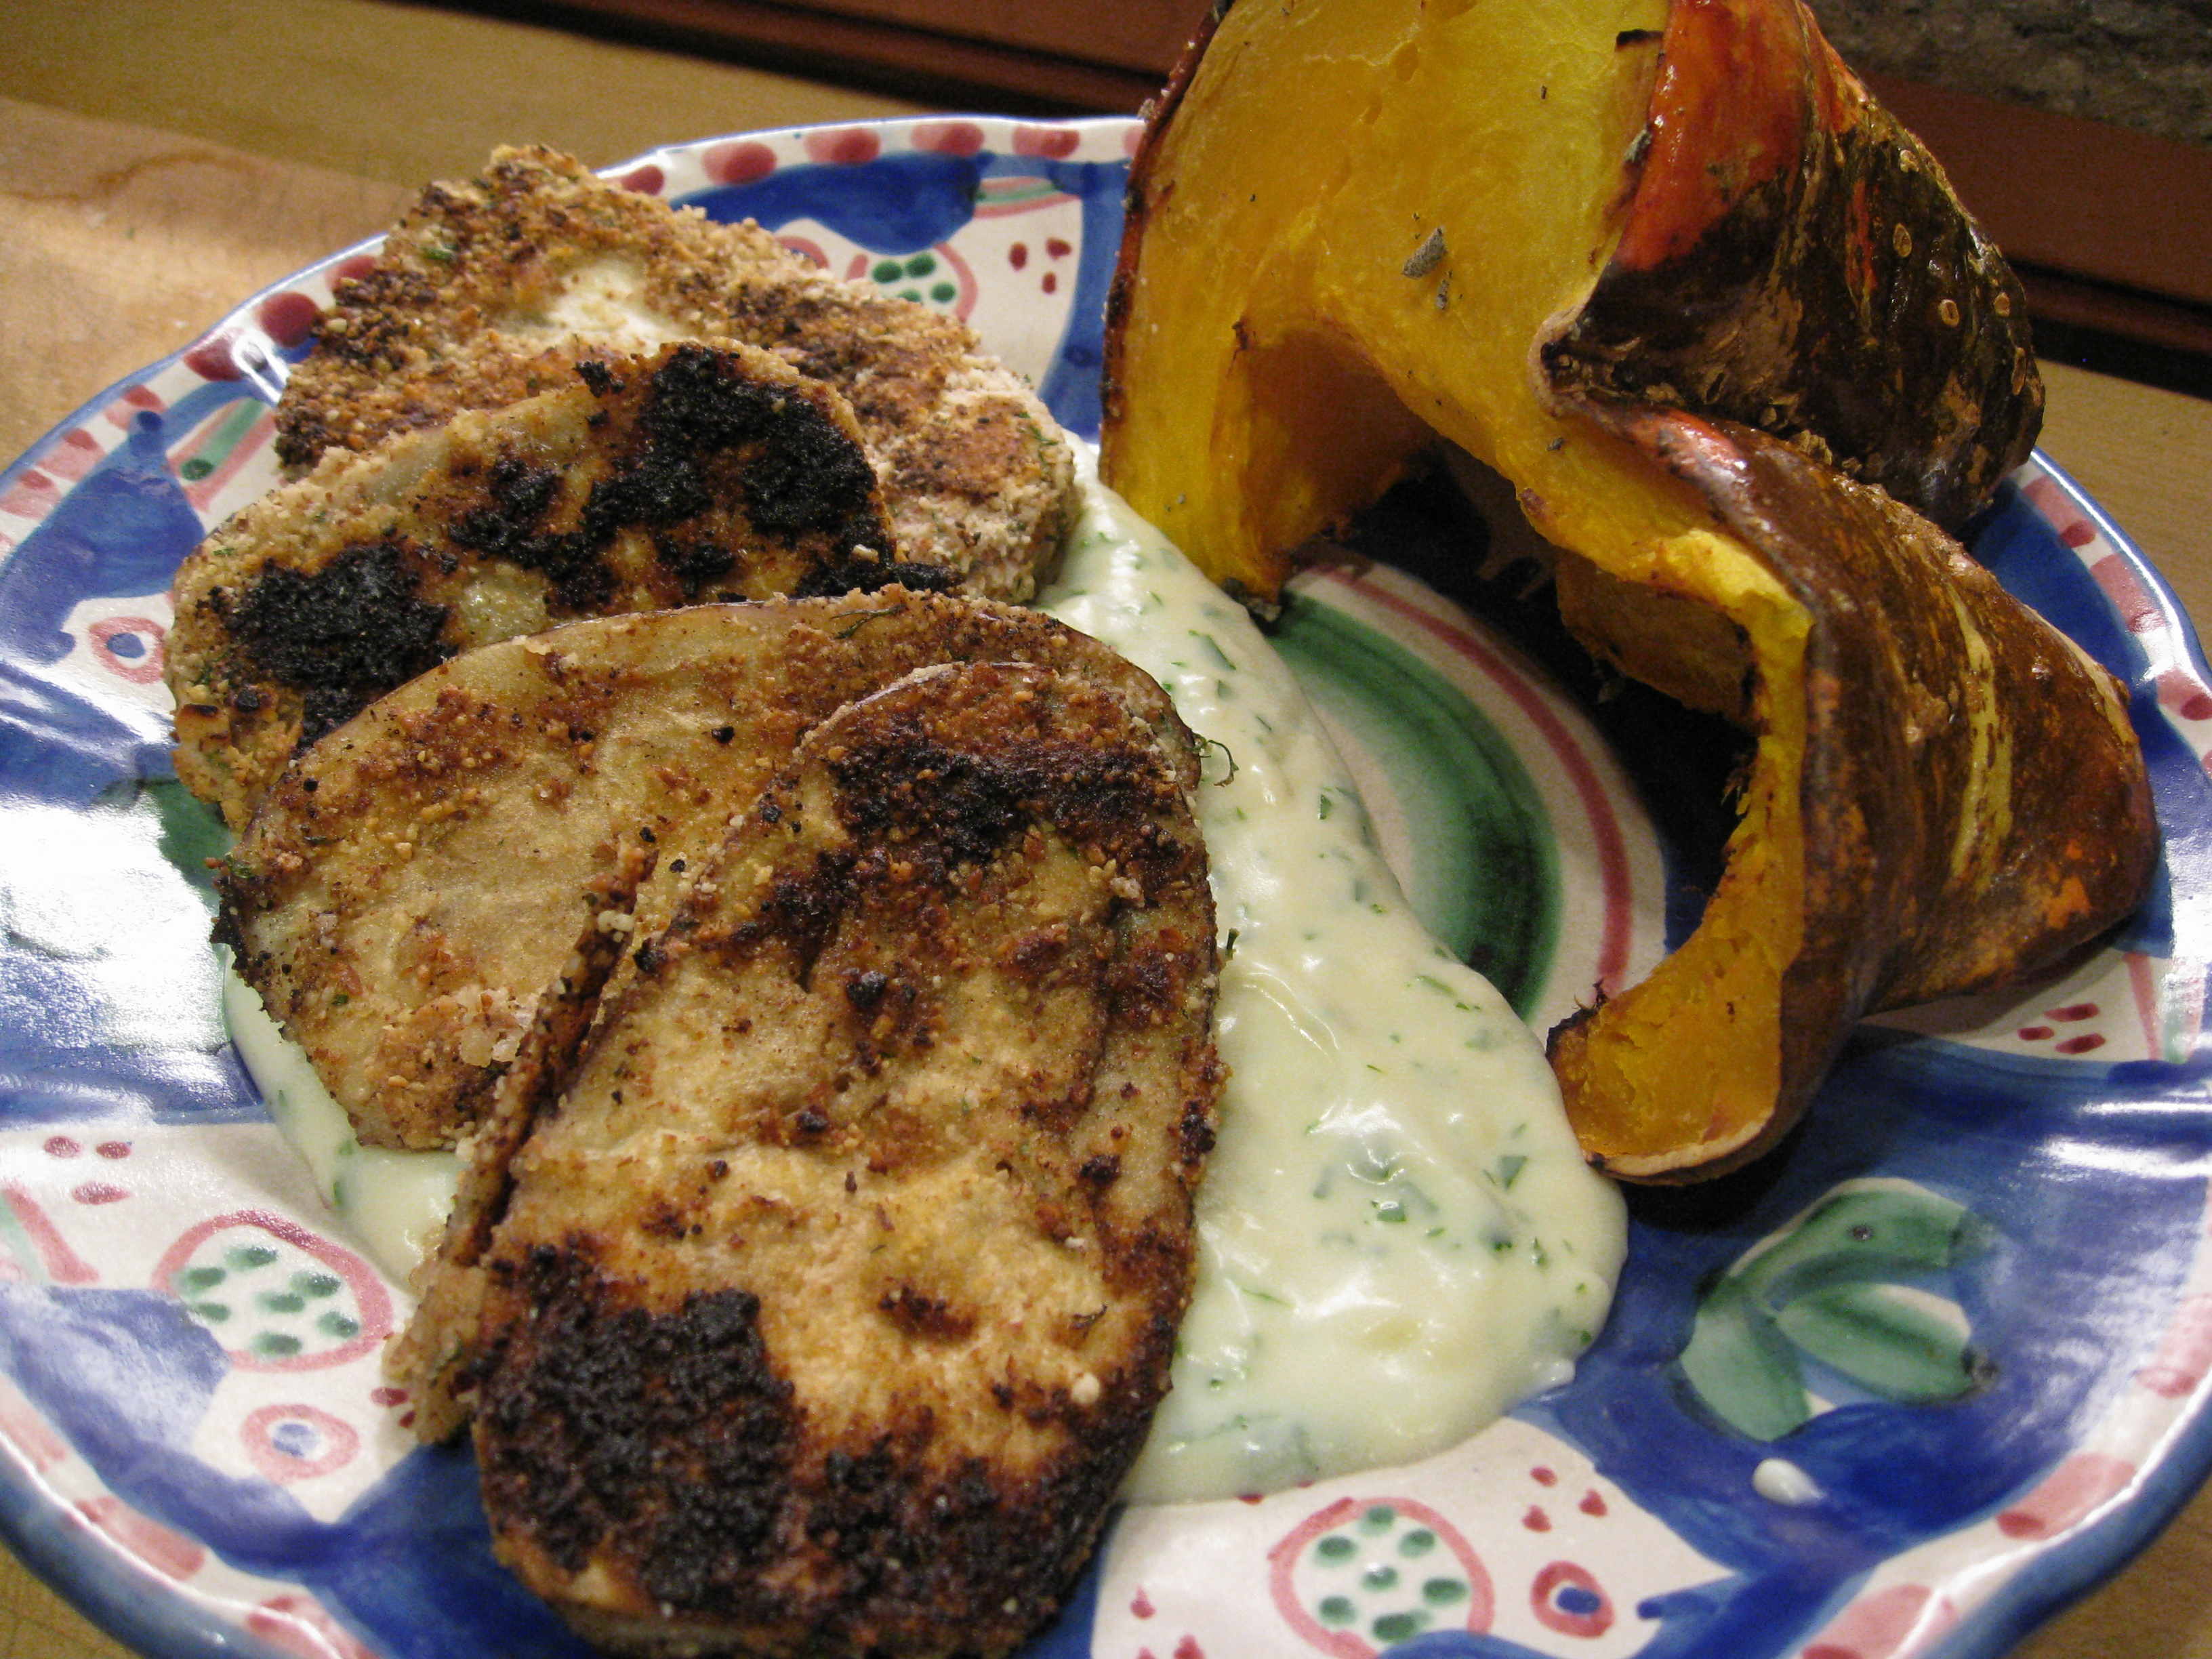 Parsley sauce is great with squash as well as the eggplant.